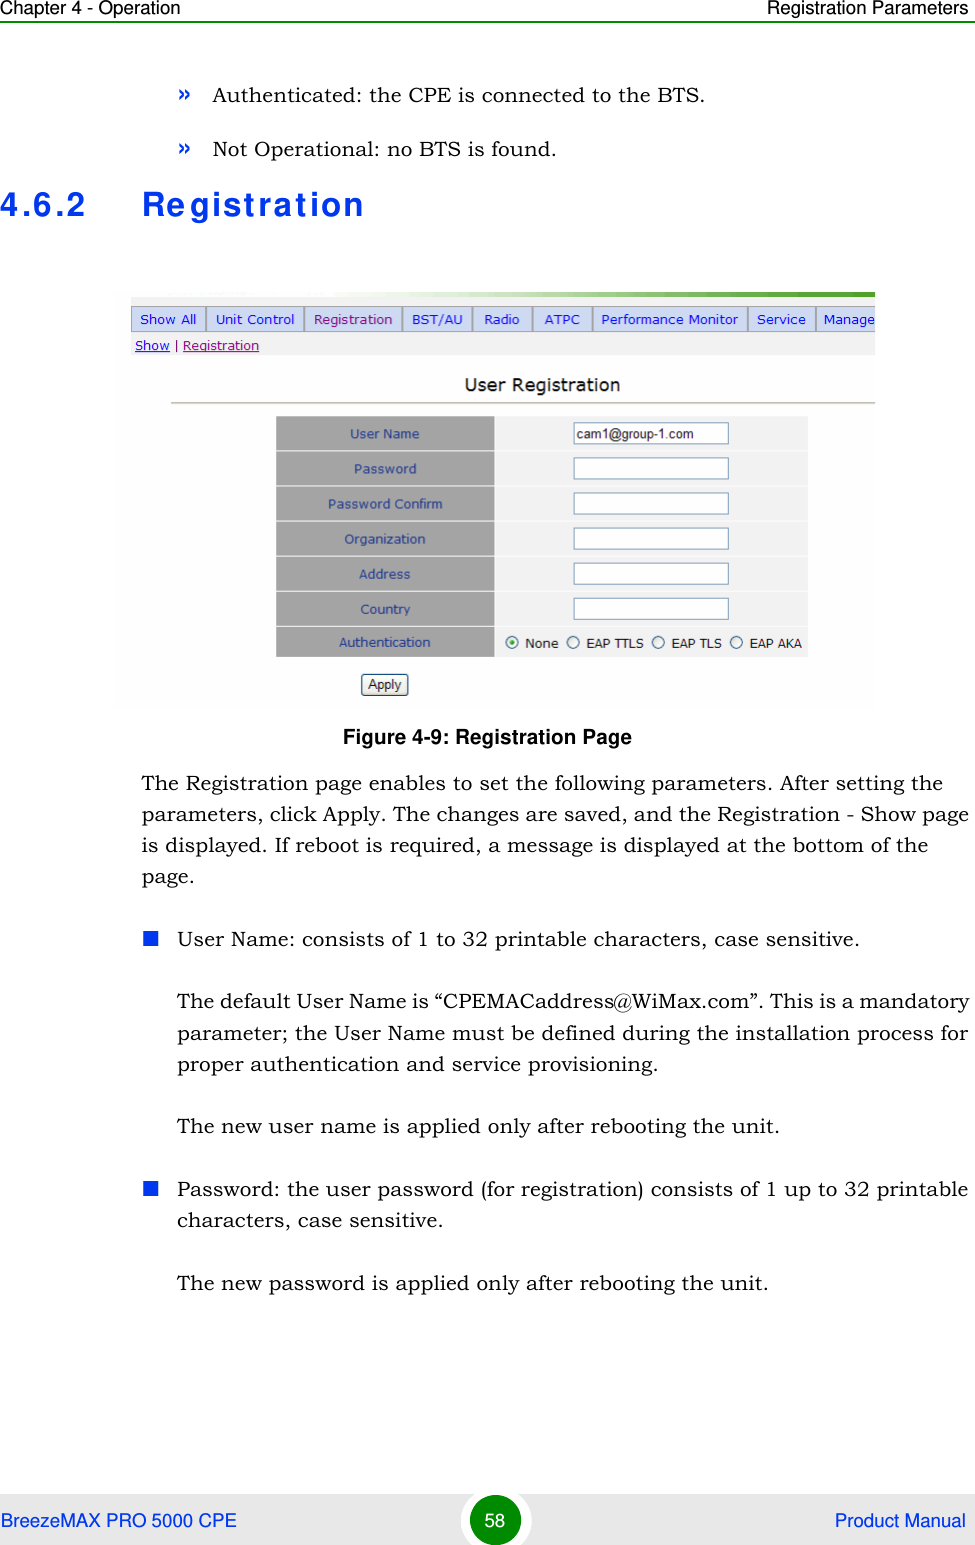 Chapter 4 - Operation Registration ParametersBreezeMAX PRO 5000 CPE 58  Product Manual»Authenticated: the CPE is connected to the BTS.»Not Operational: no BTS is found.4.6.2 RegistrationThe Registration page enables to set the following parameters. After setting the parameters, click Apply. The changes are saved, and the Registration - Show page is displayed. If reboot is required, a message is displayed at the bottom of the page.User Name: consists of 1 to 32 printable characters, case sensitive.The default User Name is “CPEMACaddress@WiMax.com”. This is a mandatory parameter; the User Name must be defined during the installation process for proper authentication and service provisioning.The new user name is applied only after rebooting the unit.Password: the user password (for registration) consists of 1 up to 32 printable characters, case sensitive.The new password is applied only after rebooting the unit.Figure 4-9: Registration Page